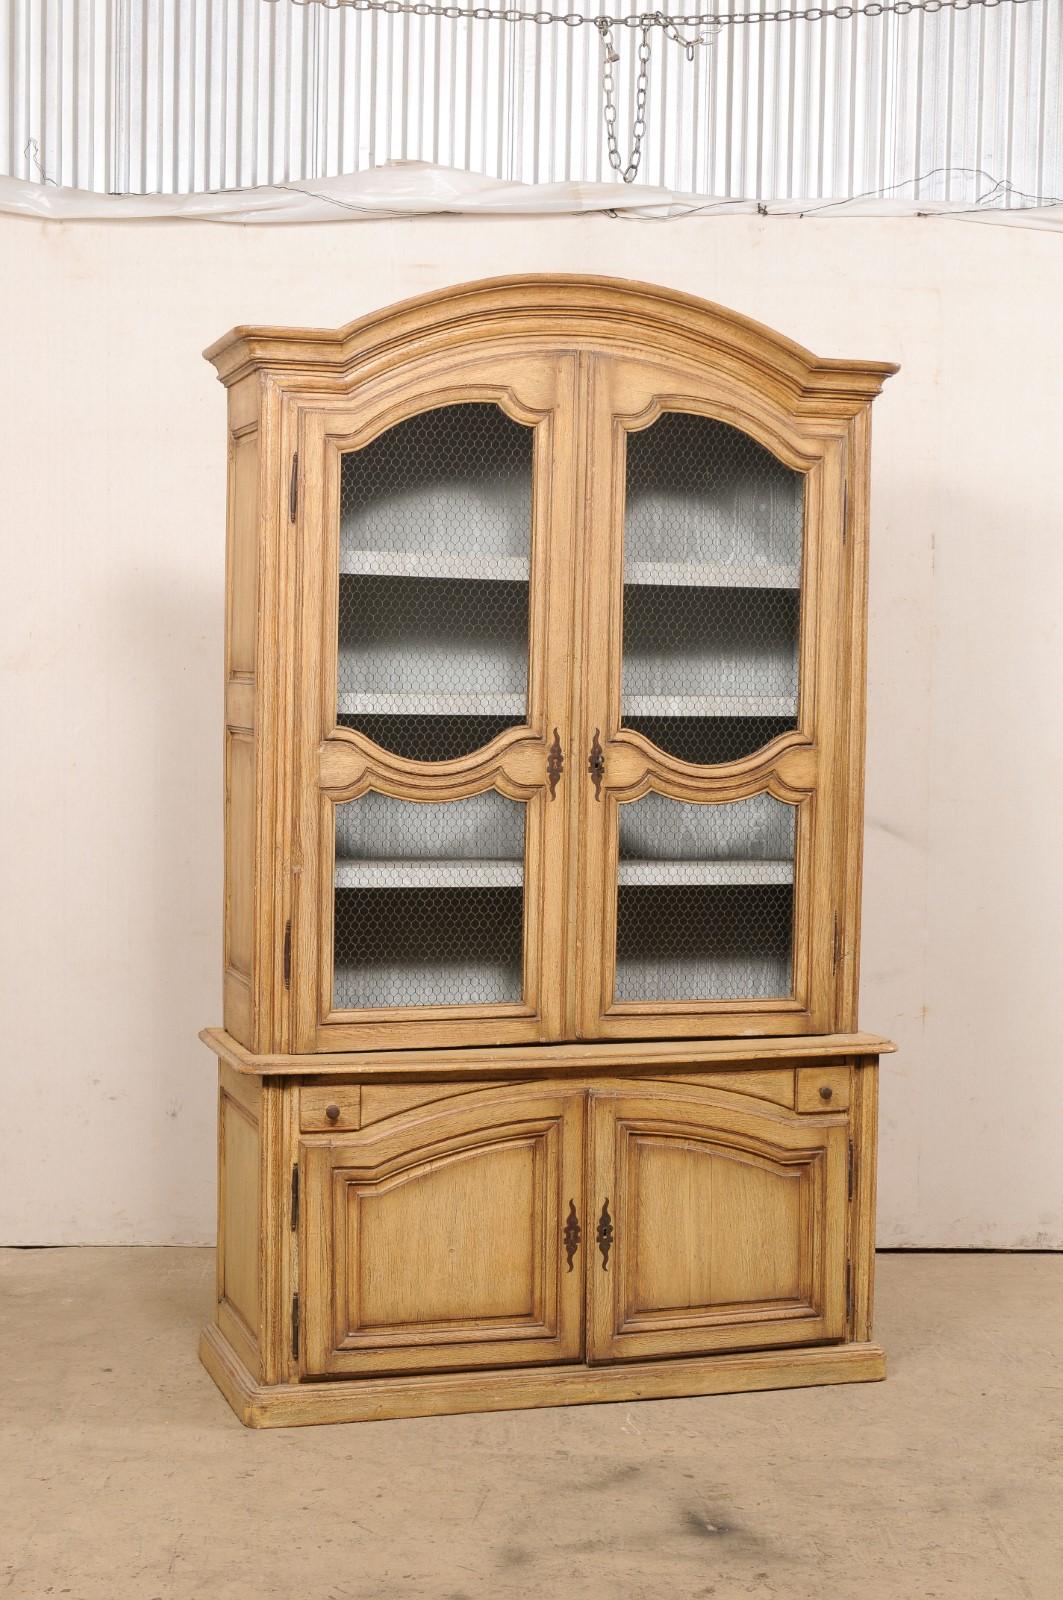 A French Rococo tall wooden display and storage cabinet from the 18th century. This antique oak wood cabinet from France features a nicely arched and molded center top pediment, is designed throughout in nice molding & raised panels, and presented